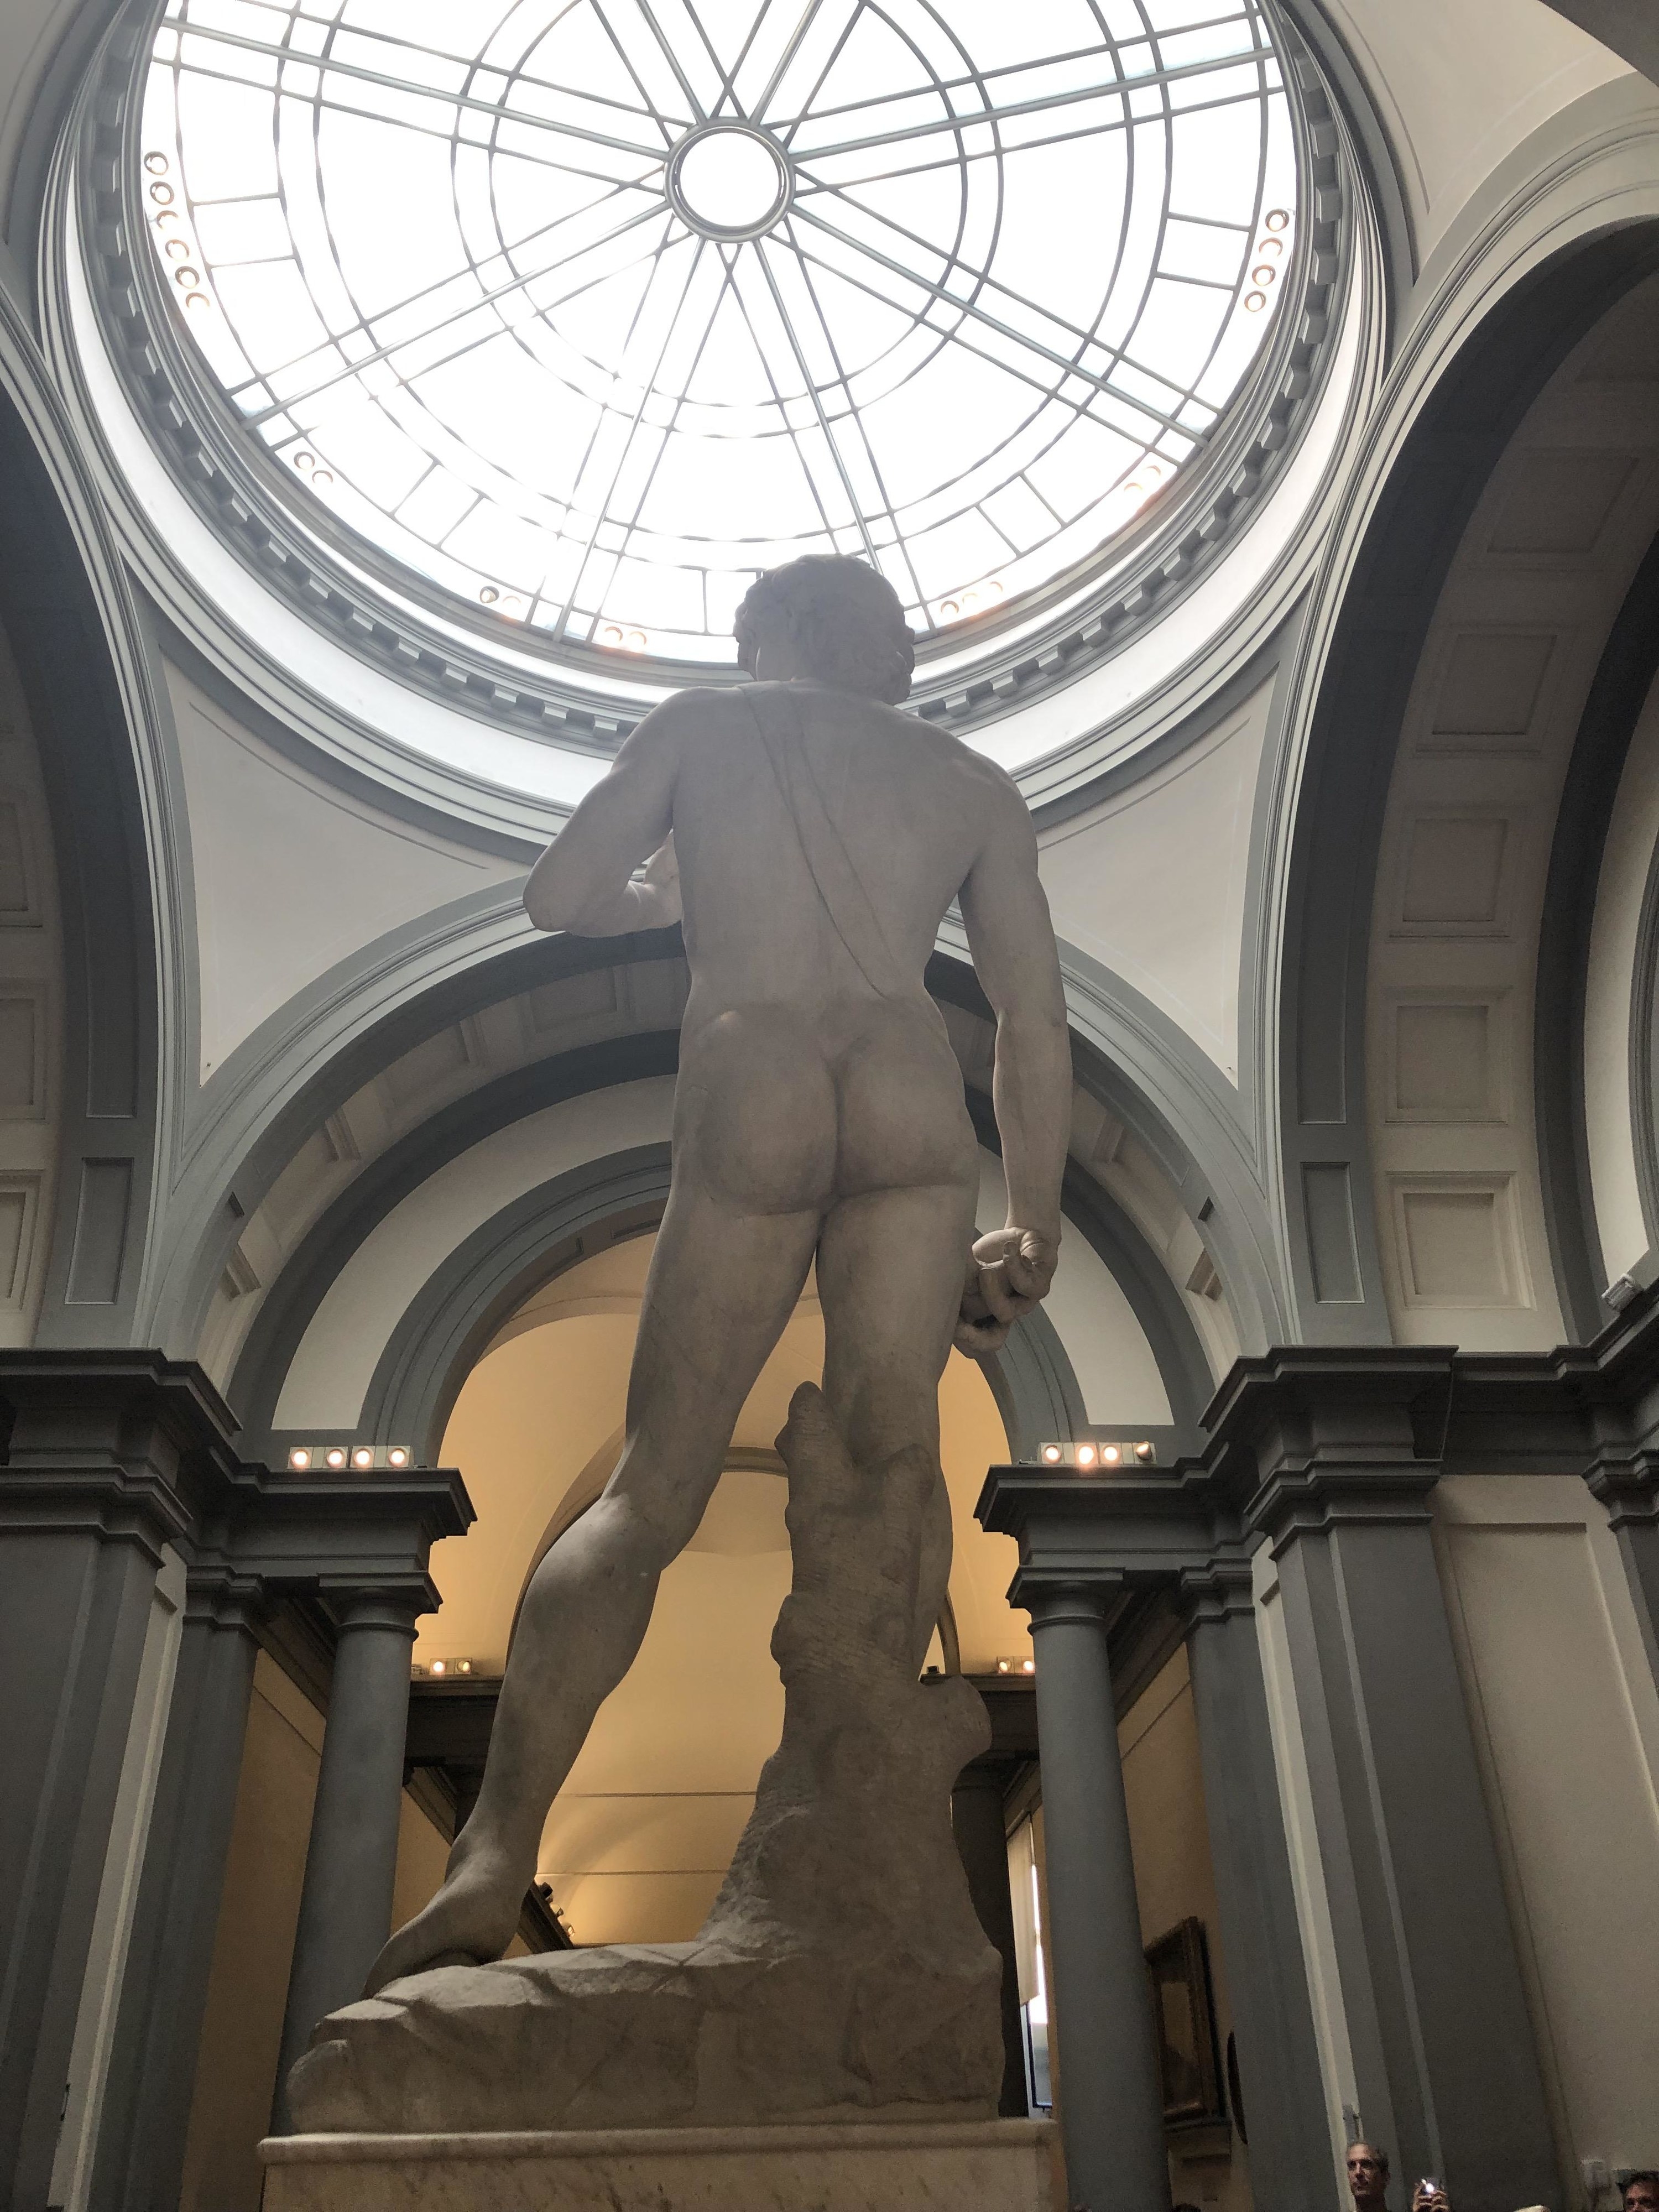 The rear view of David, with bare back and buttocks